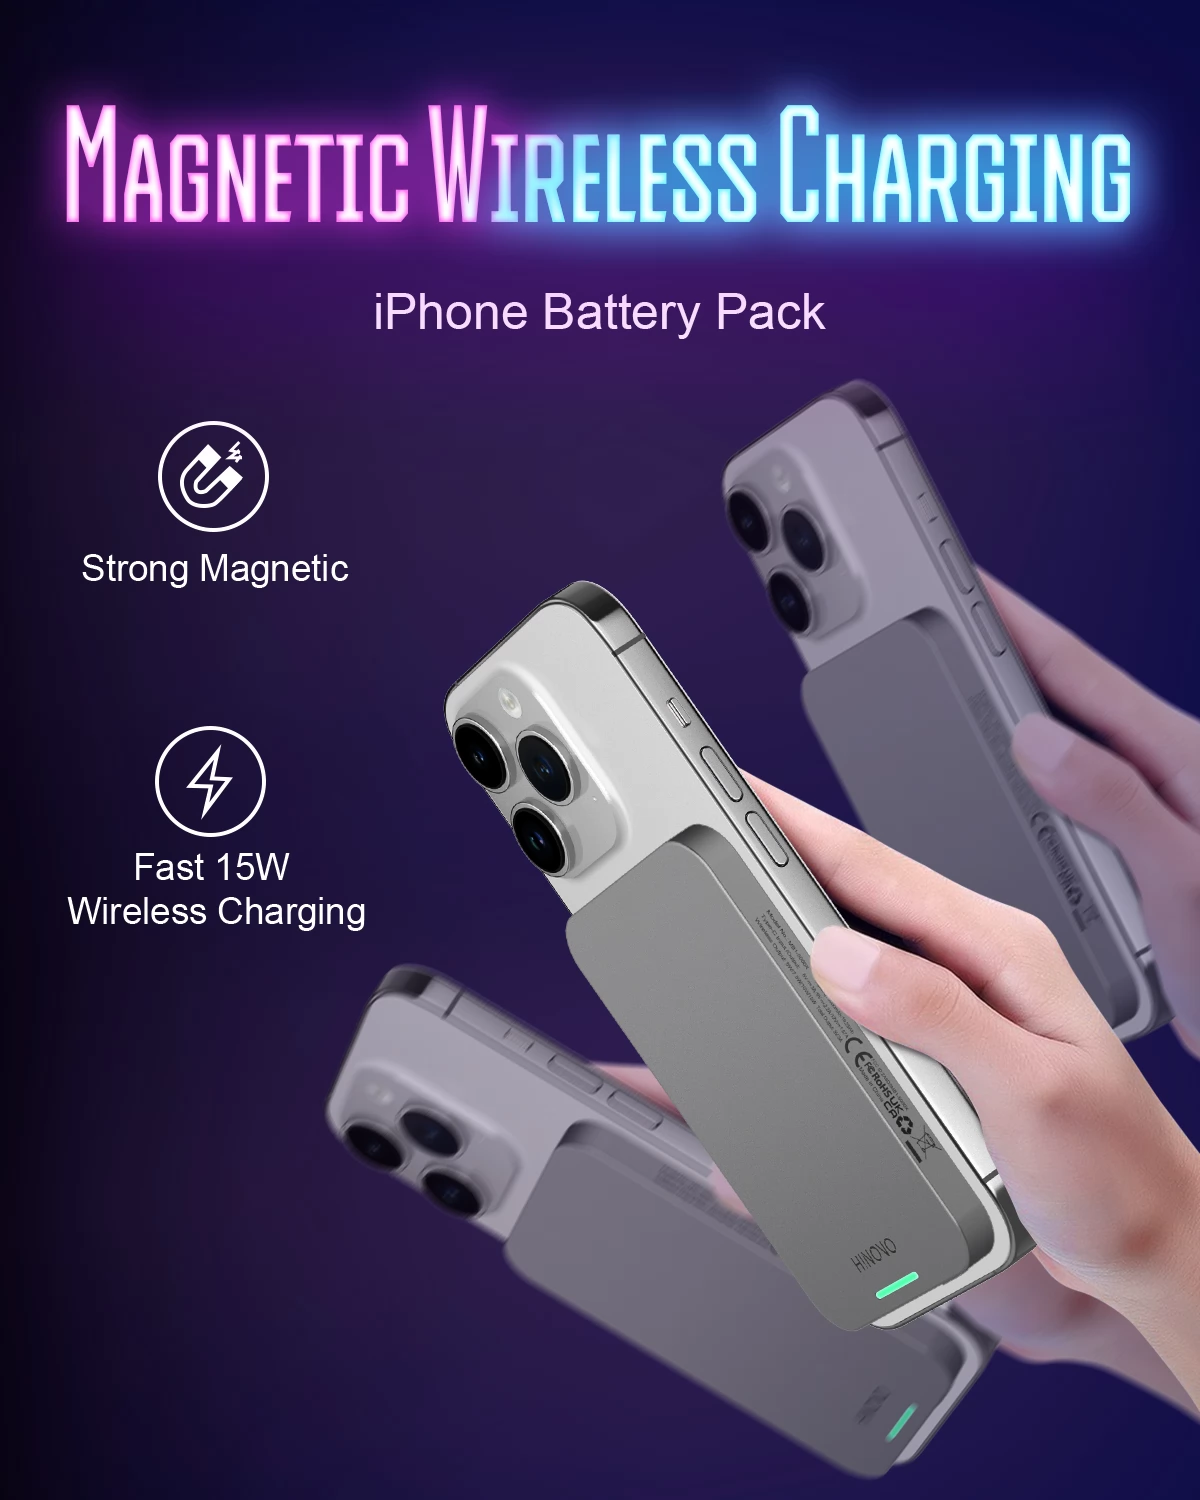 HINOVO MB1-5000x Wireless Portable Charger, 5000mAh Magnetic Wireless Power Bank, PD 20W Fast Charging Cyberpunk Style